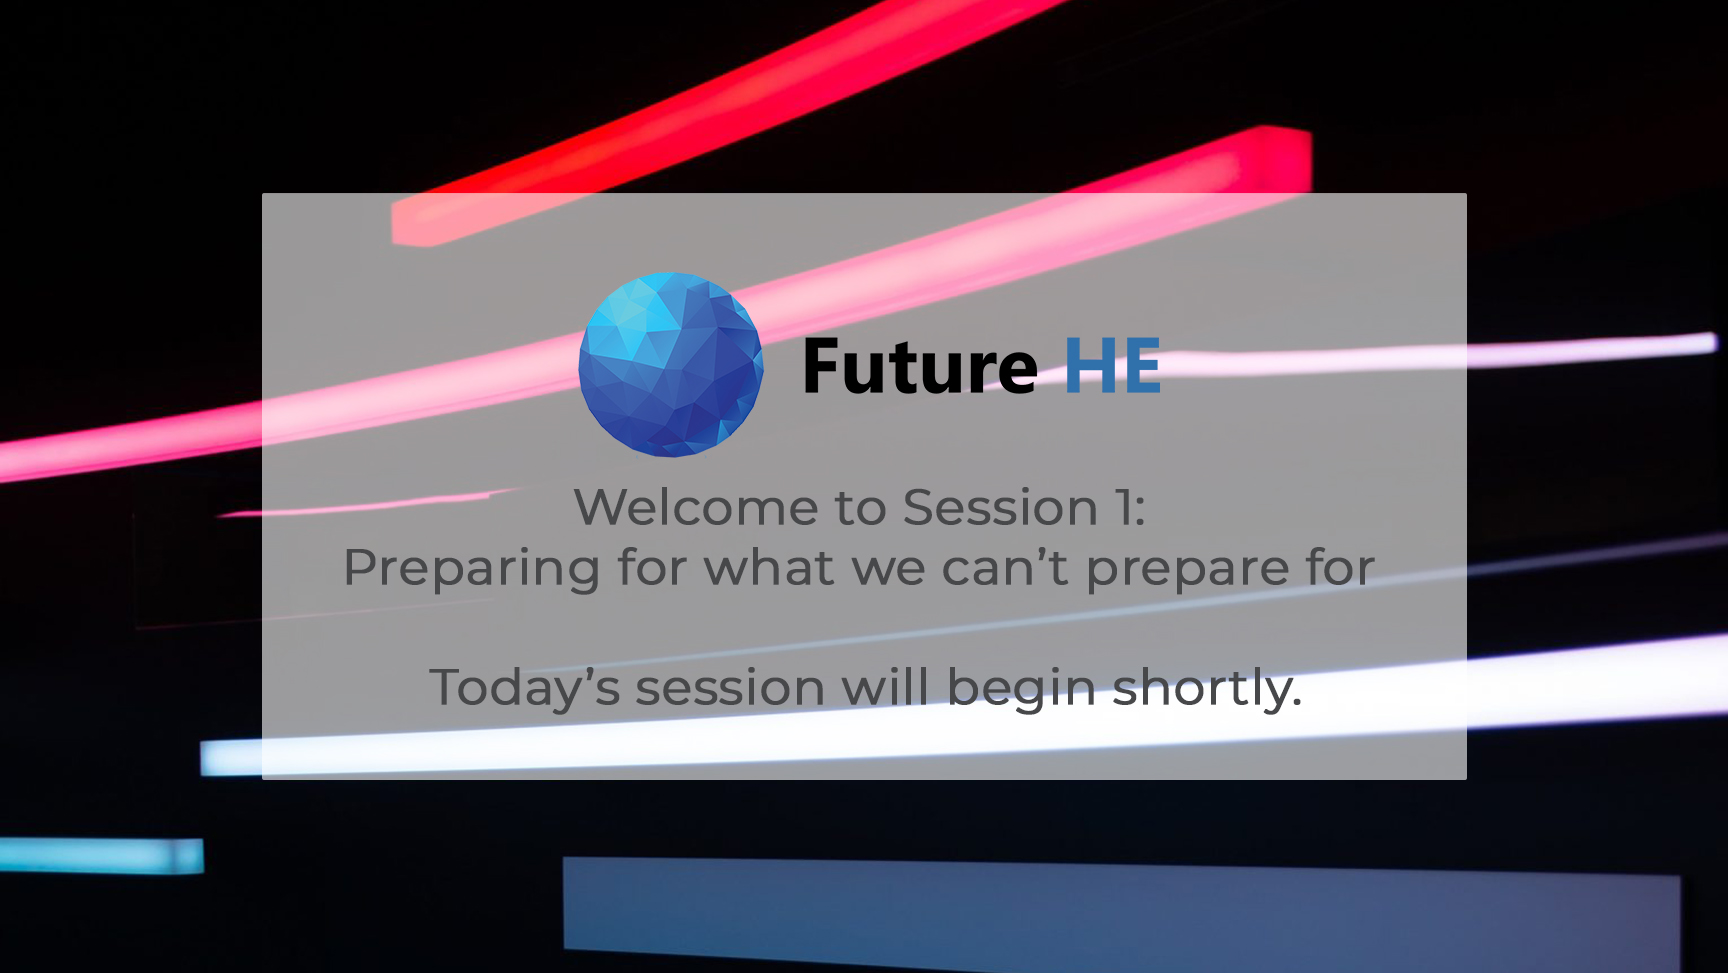 Session 1: Preparing for what we can’t prepare for